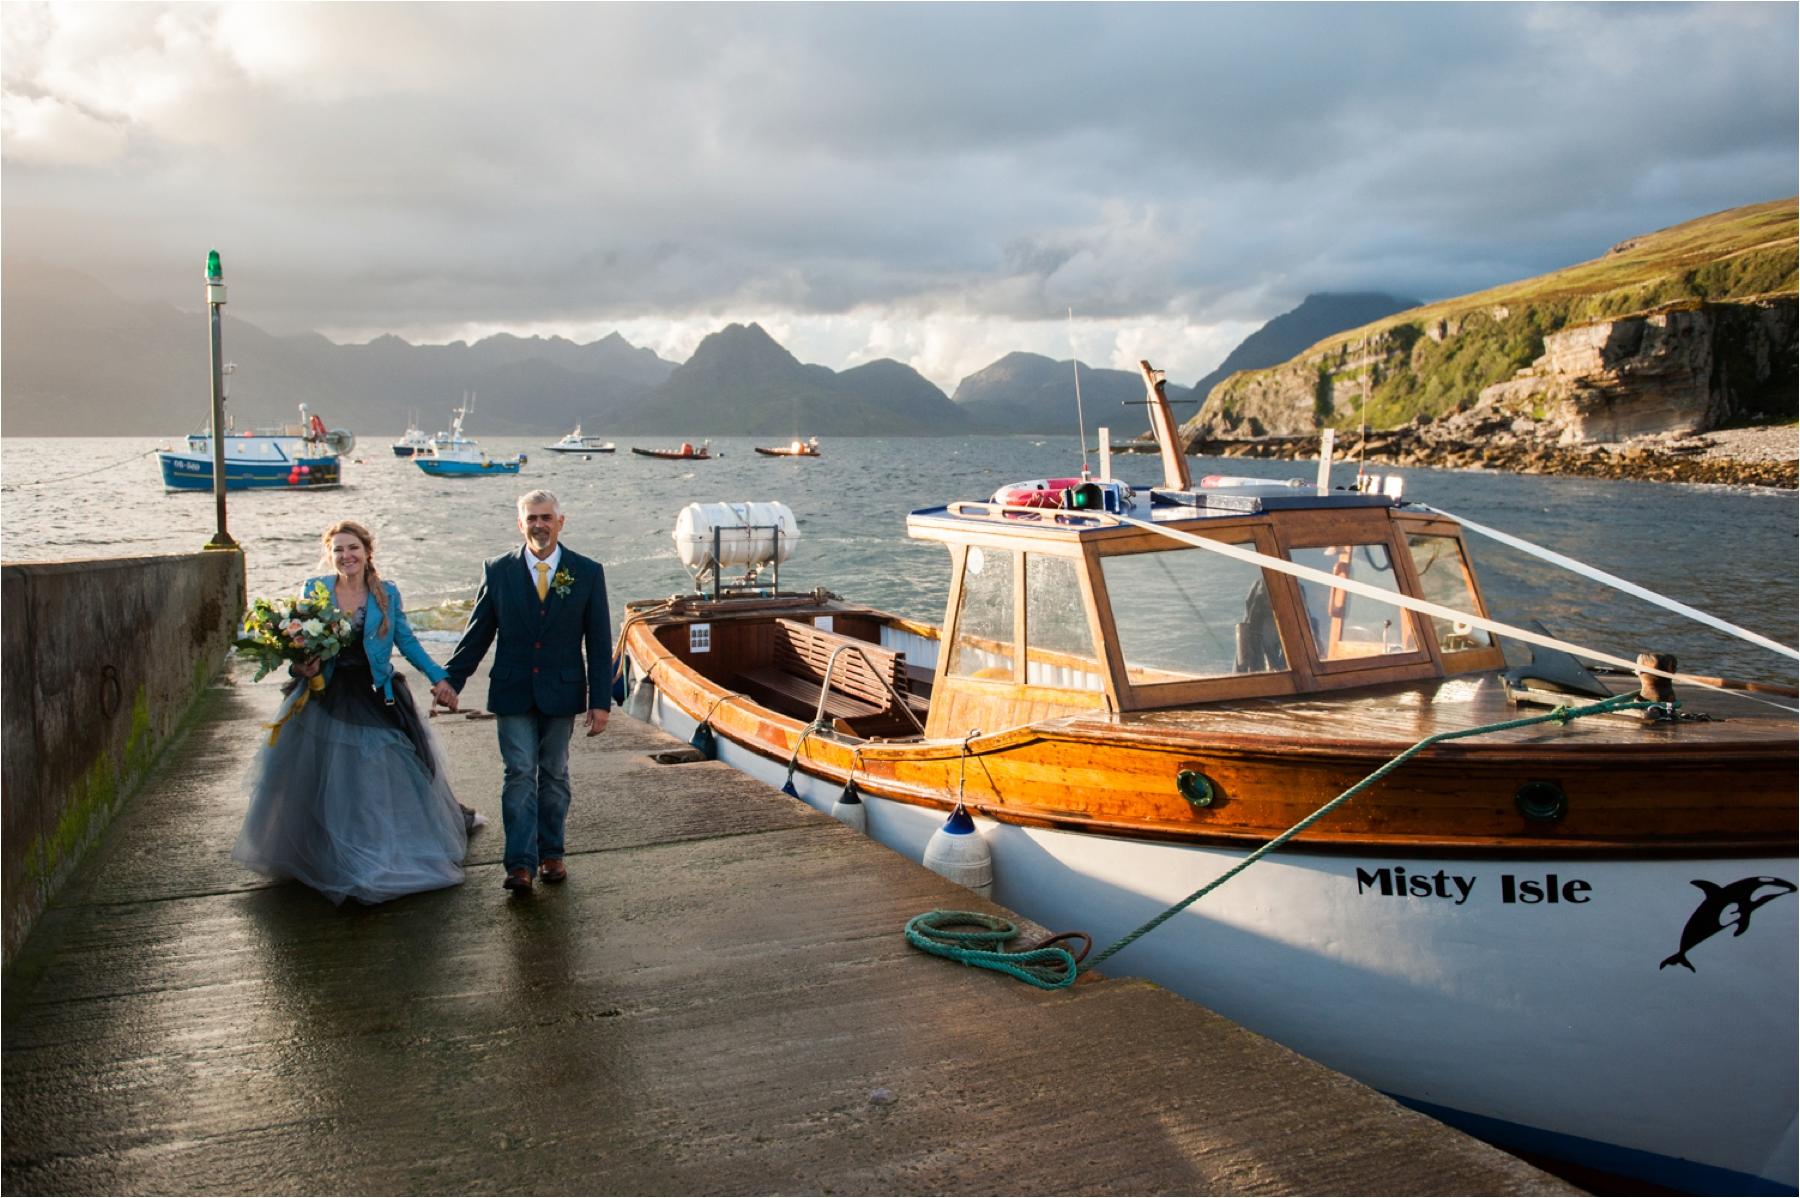 The bride and groom leave the Misty Isle boat after their civil marriage ceremony in dramatic weather. 